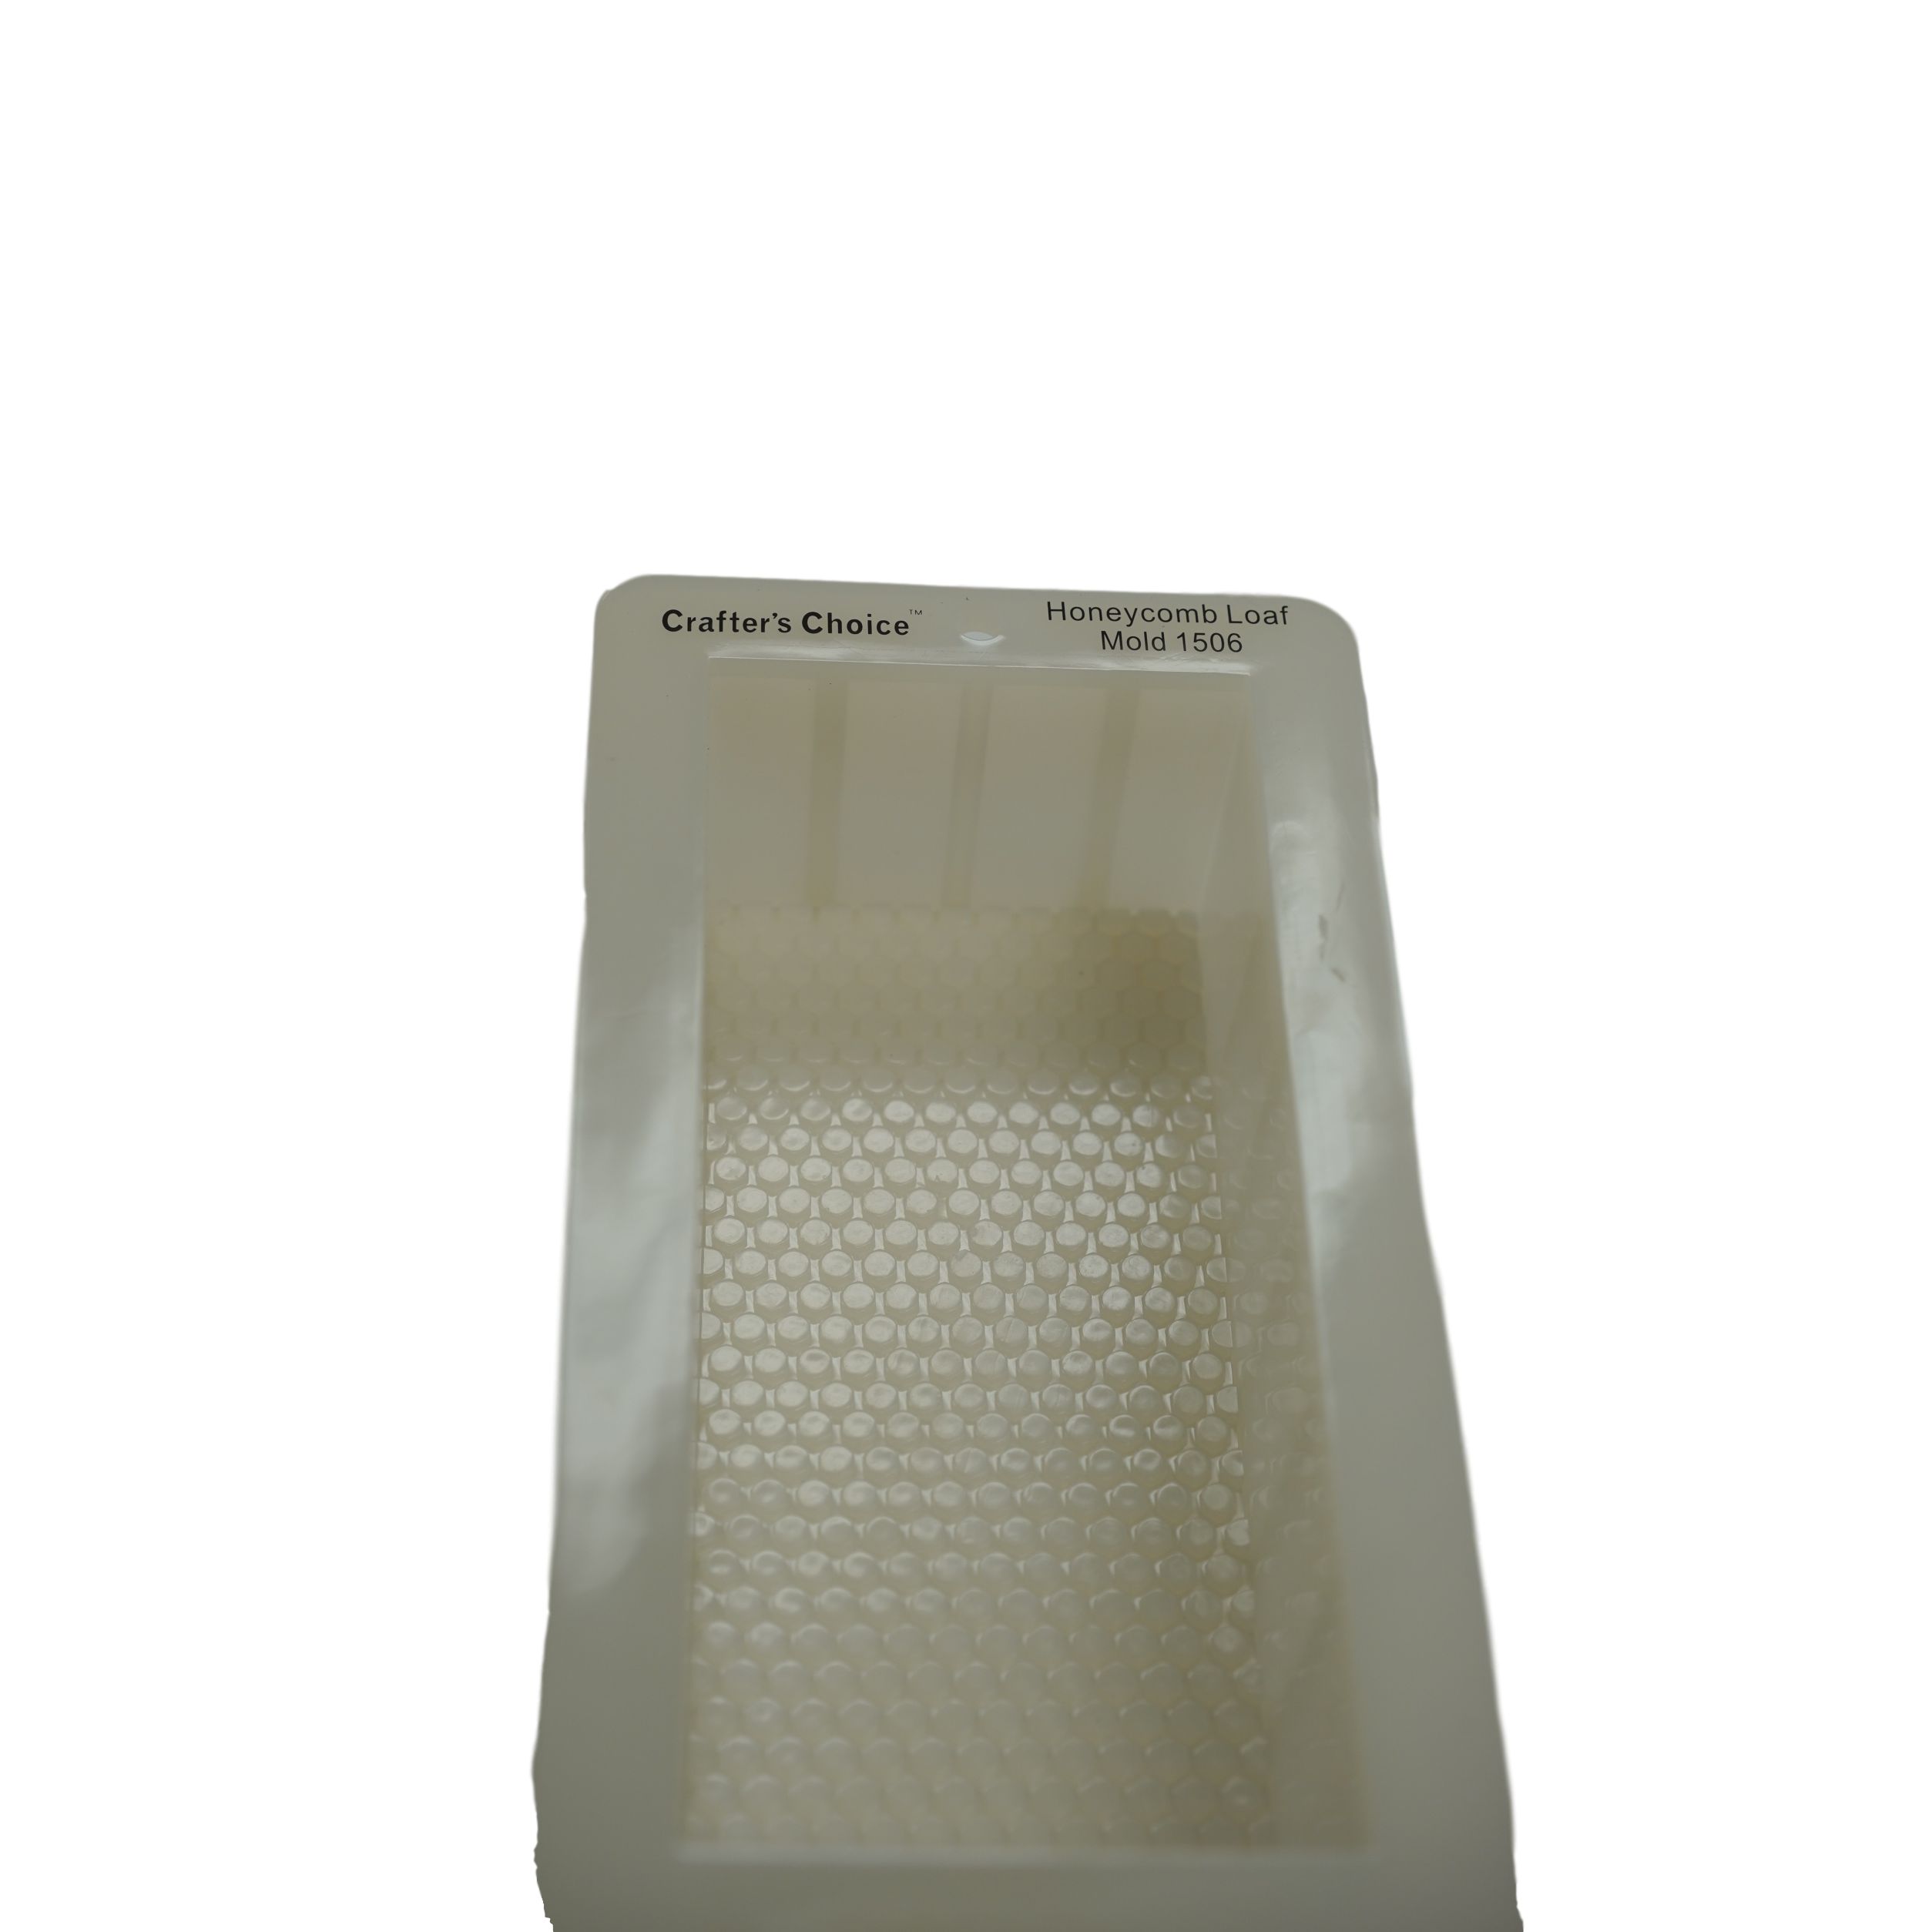 https://www.soapgoods.com/images/thumbnails/2508/2508/detailed/10/silicone-mold-honeycomb-loaf-p-3103-7671.png